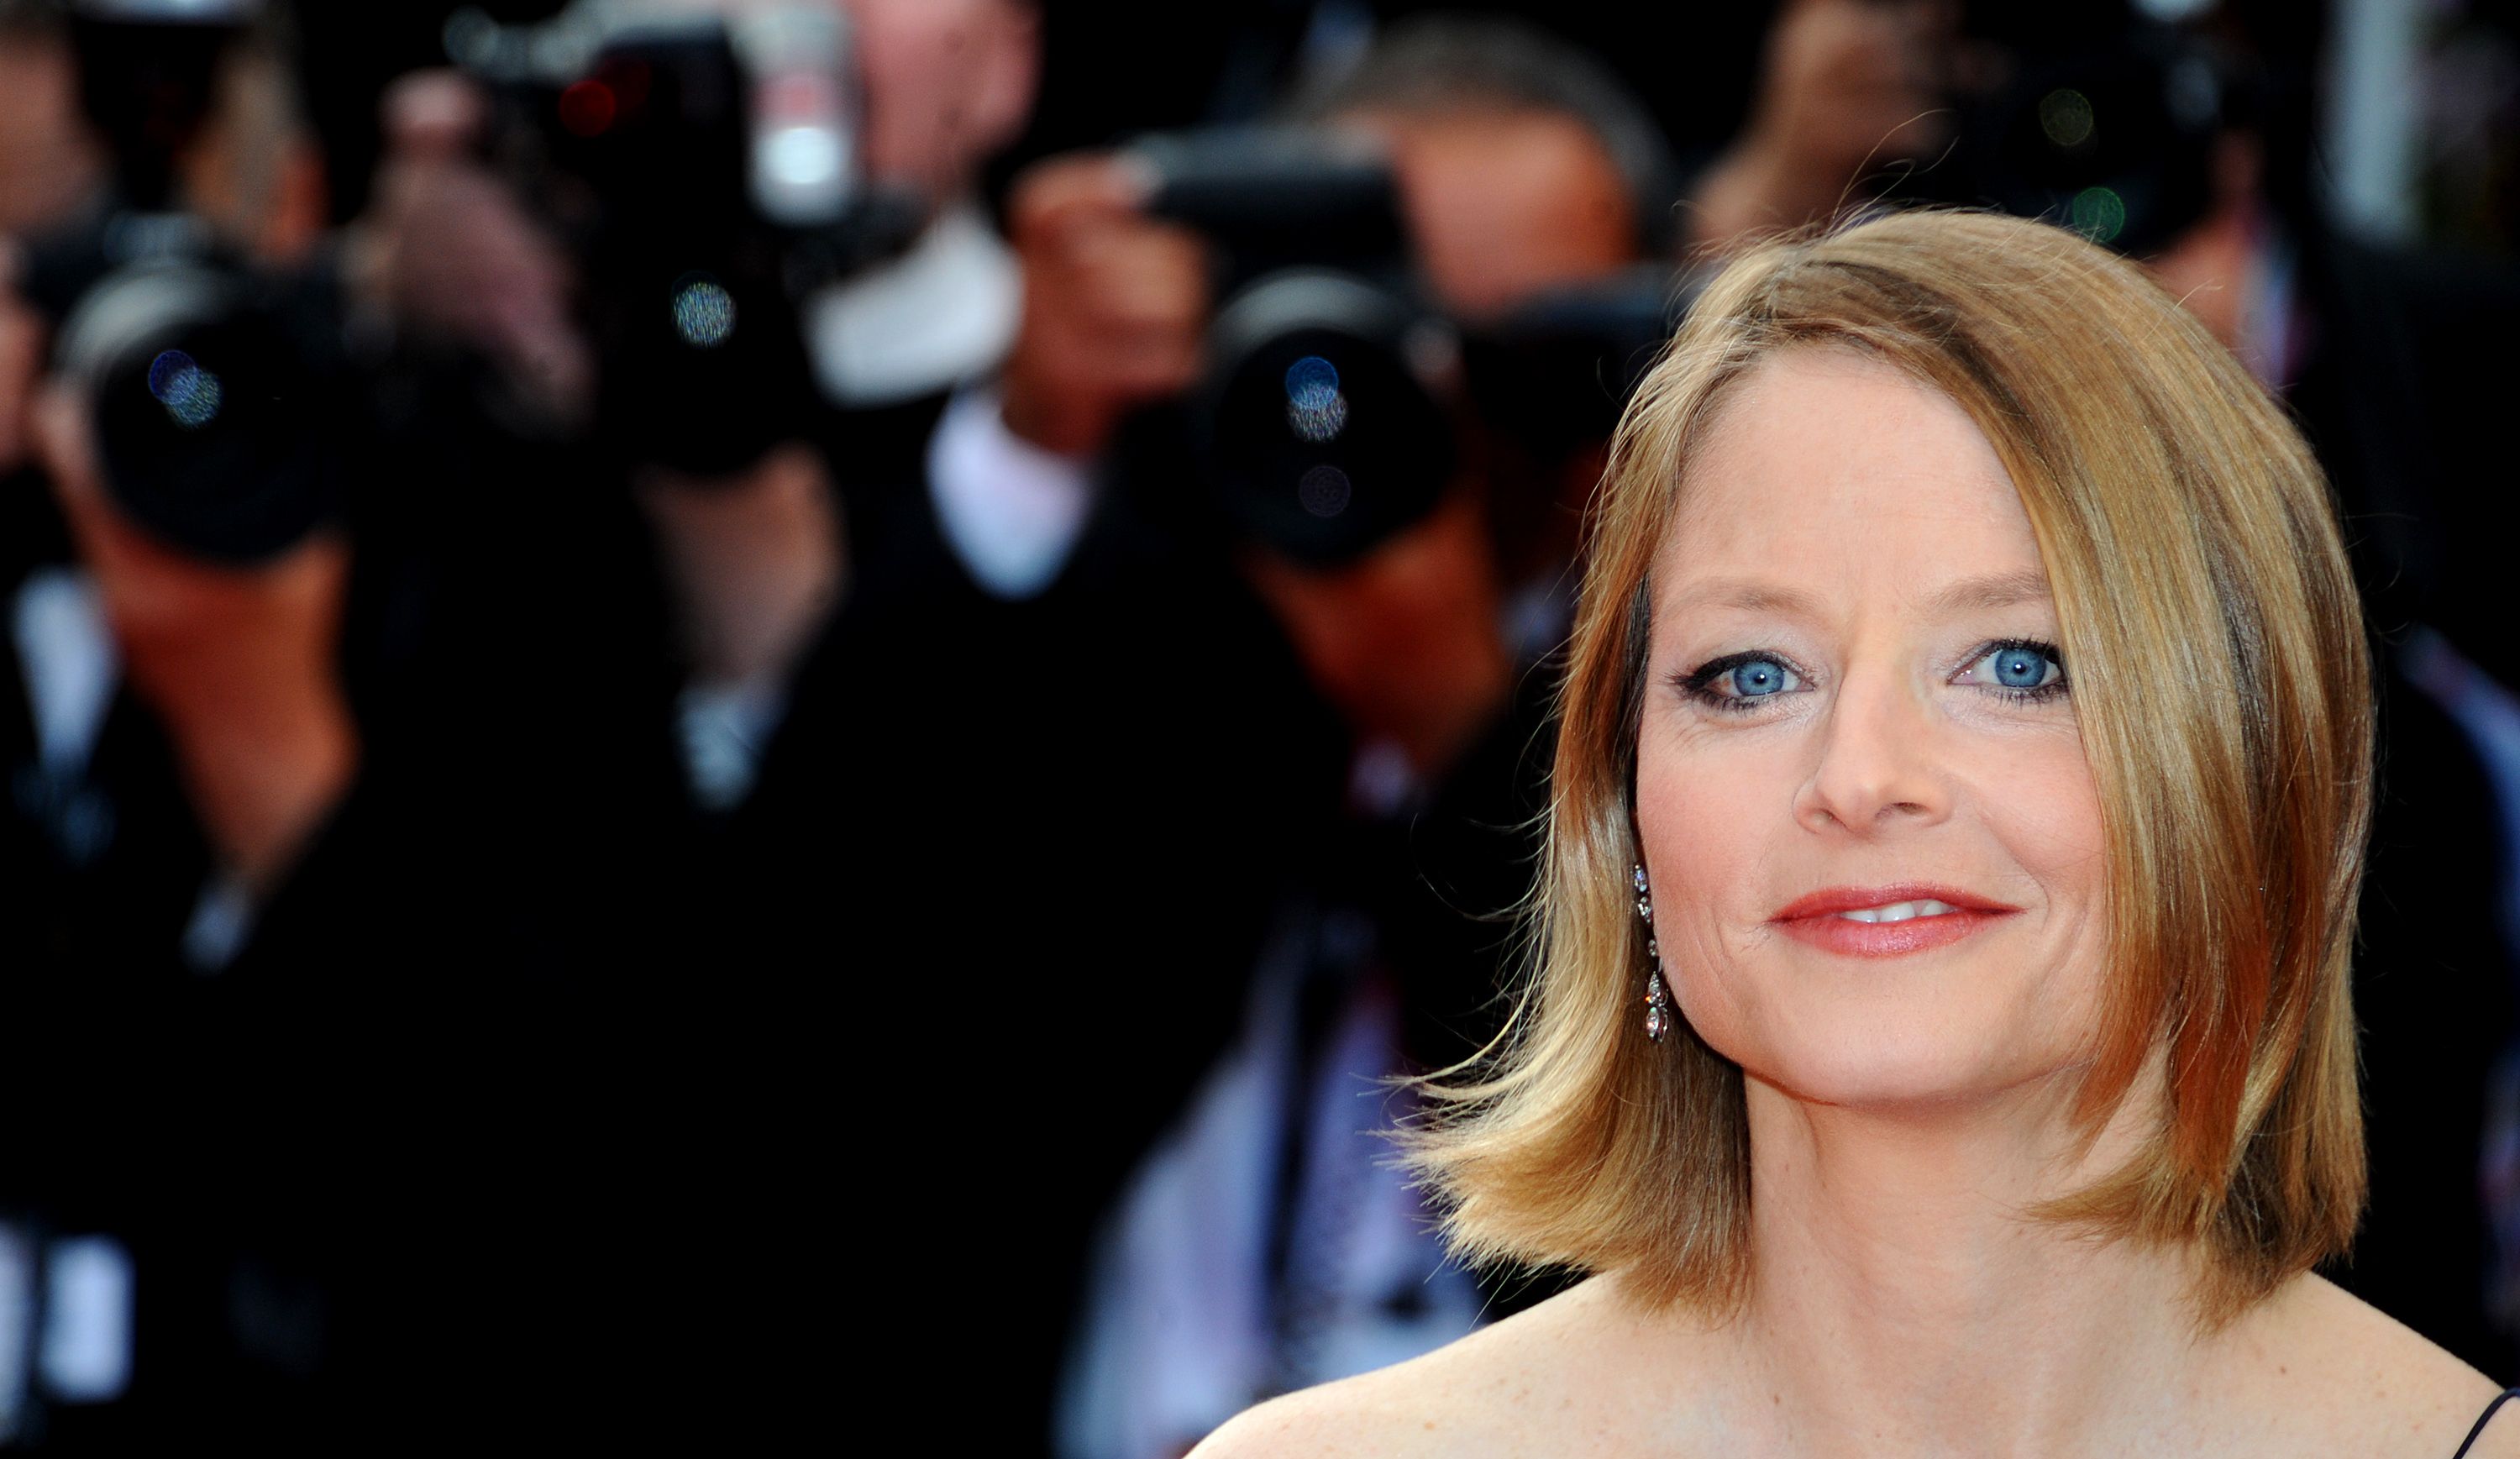 It's a matter of what moves me: Actor Jodie Foster